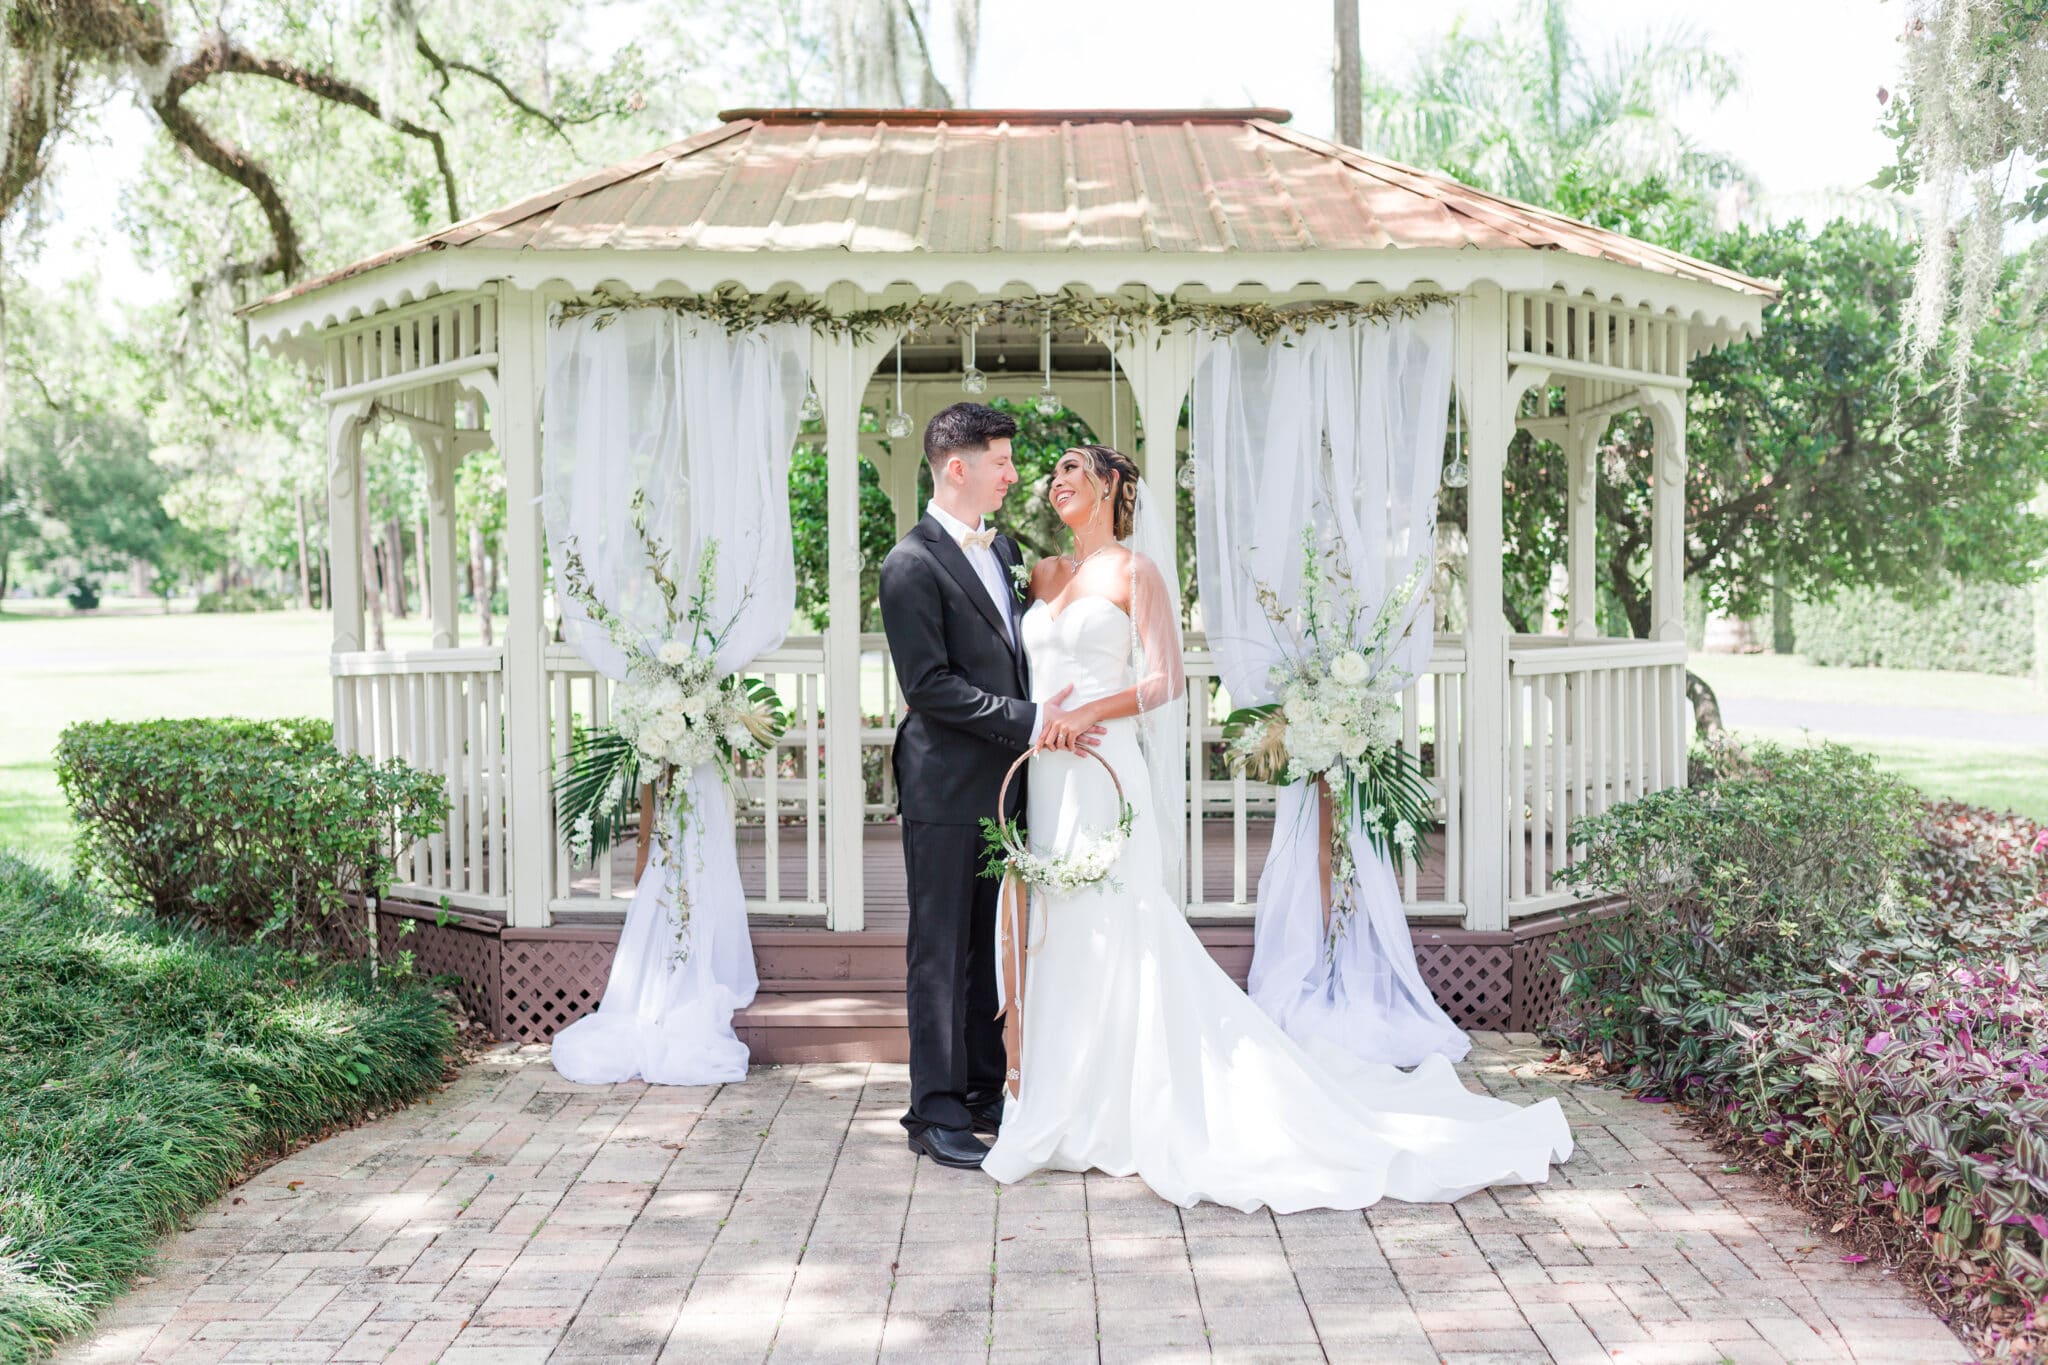 bride and groom standing together in front of the gazebo where their ceremony site is for the glamorous gold wedding inspiration shoot.